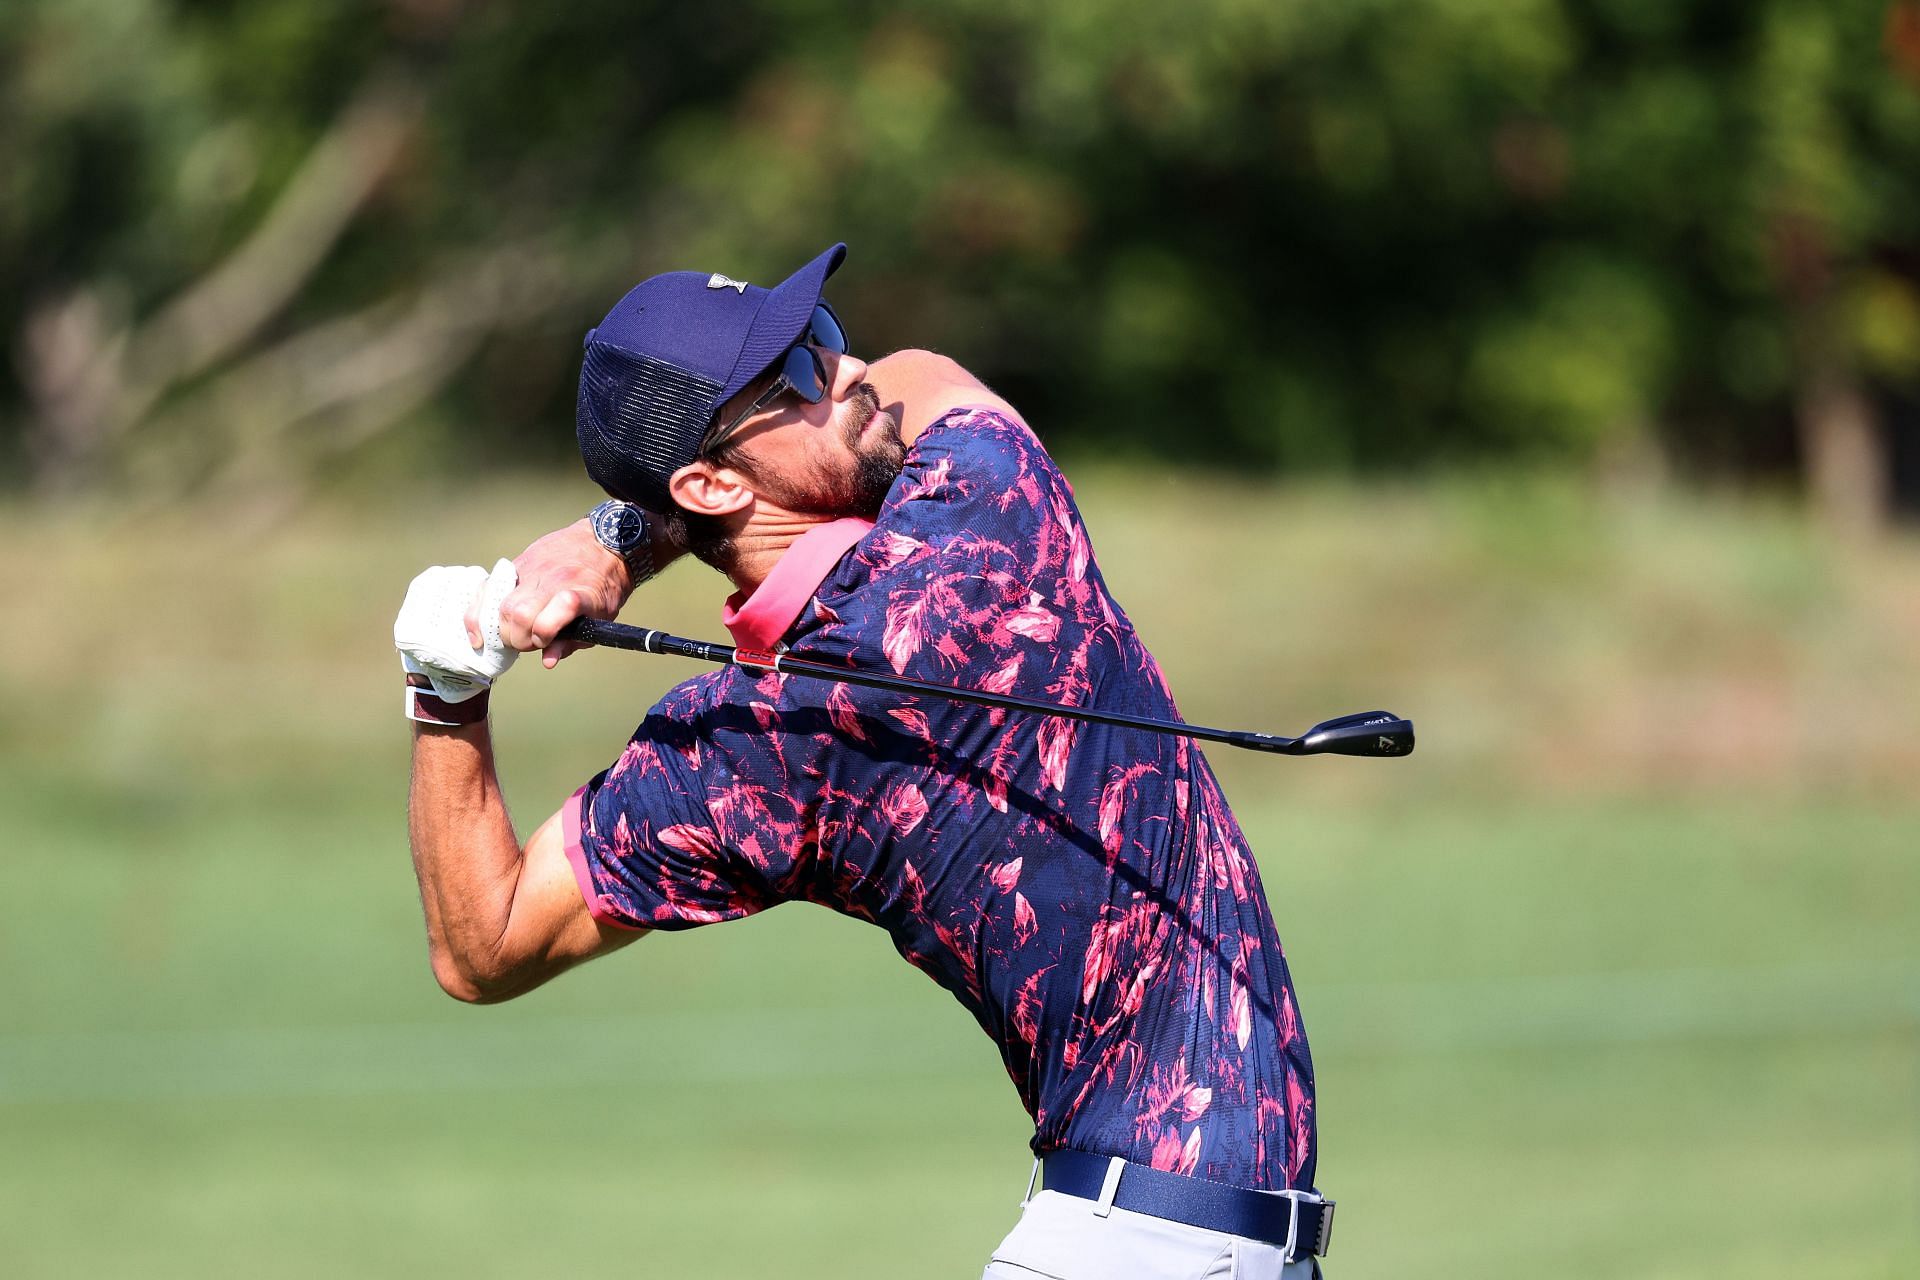 Michael Phelps plays a shot during the Gardner Heidrick Pro-Am ahead of the BMW Championship at Caves Valley Golf Course in Owings Mills, Maryland.